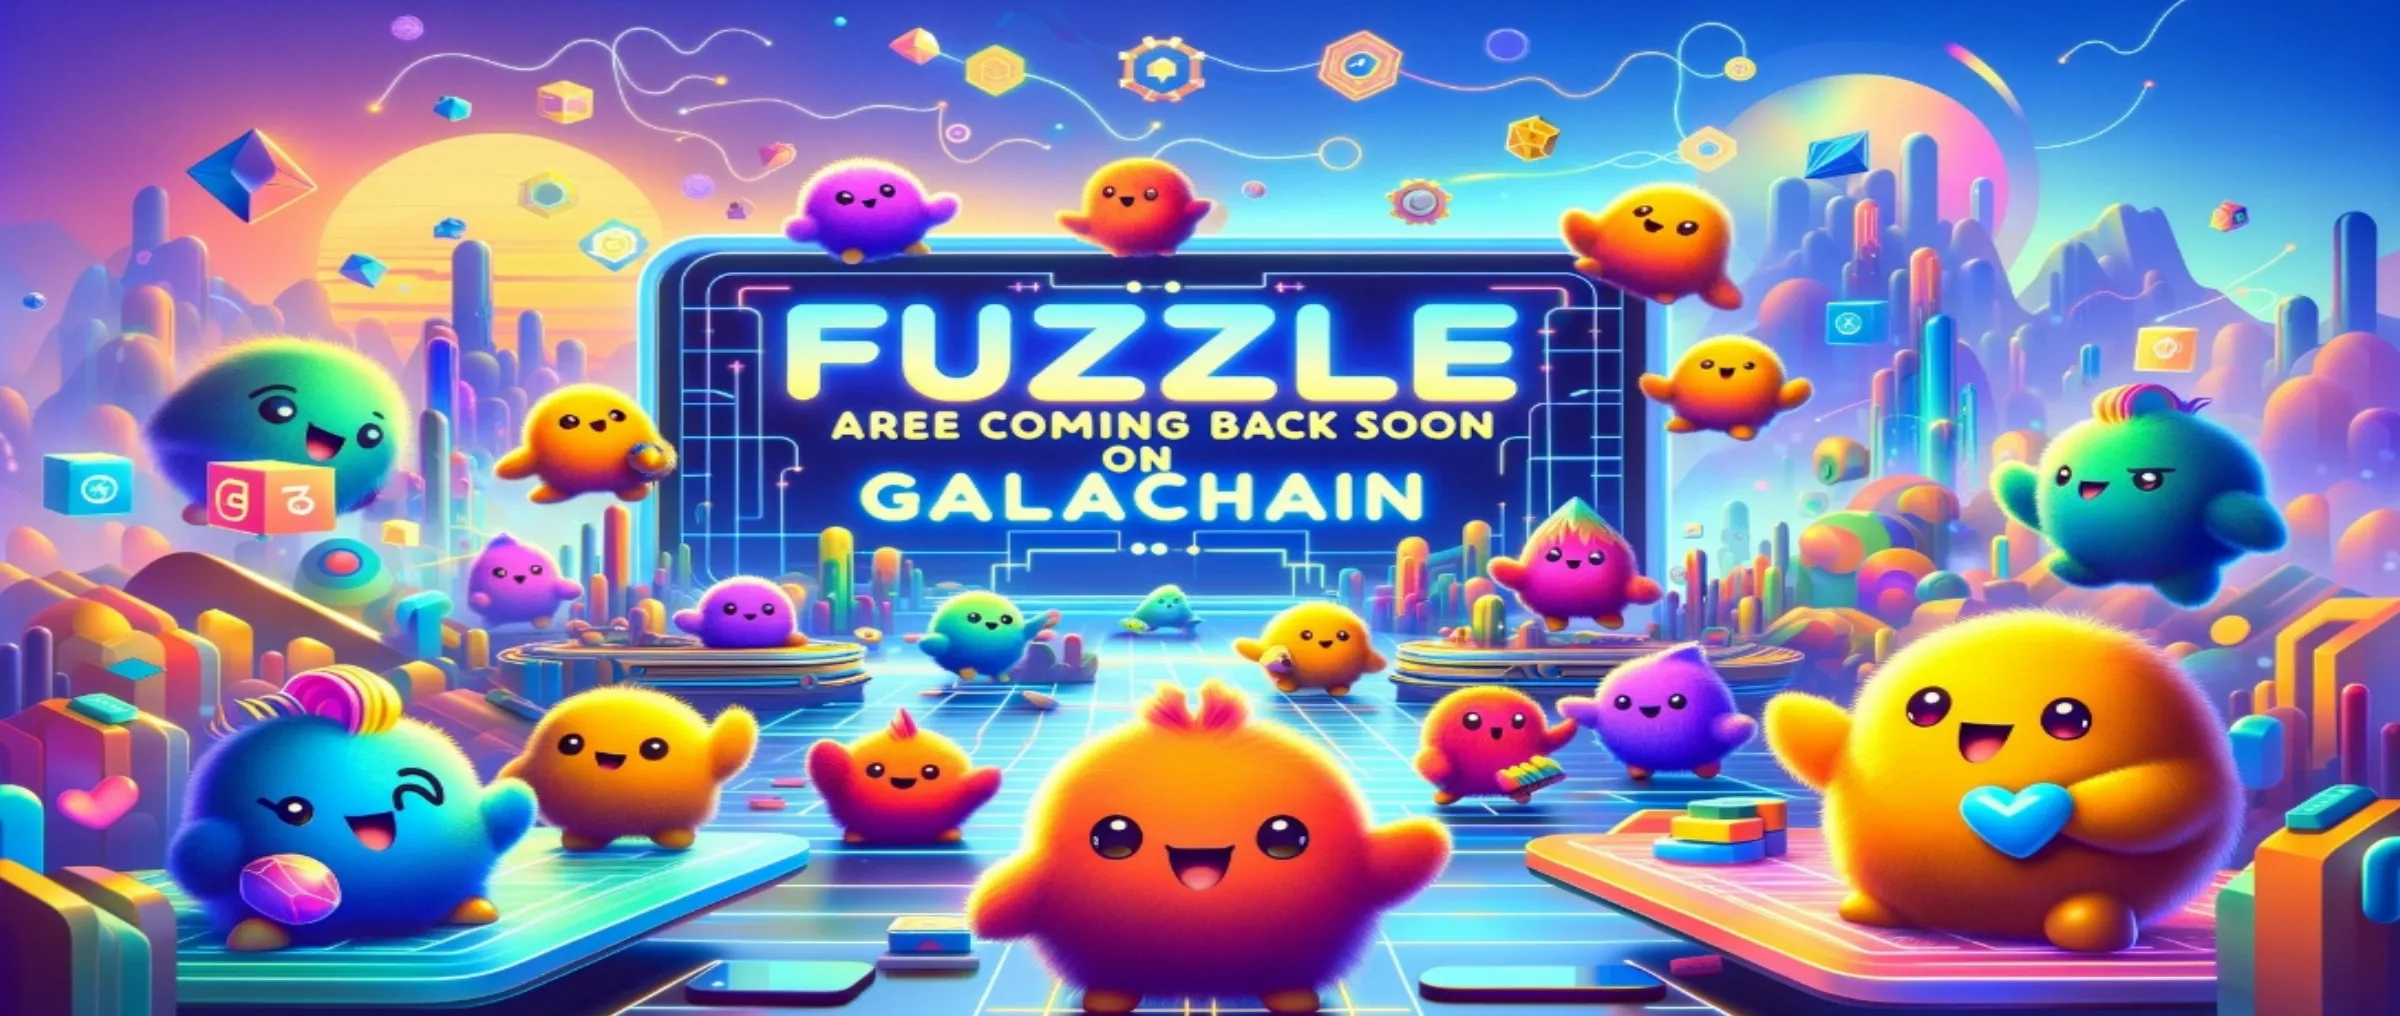 Fuzzle NFT are back: Coming soon on GalaChain